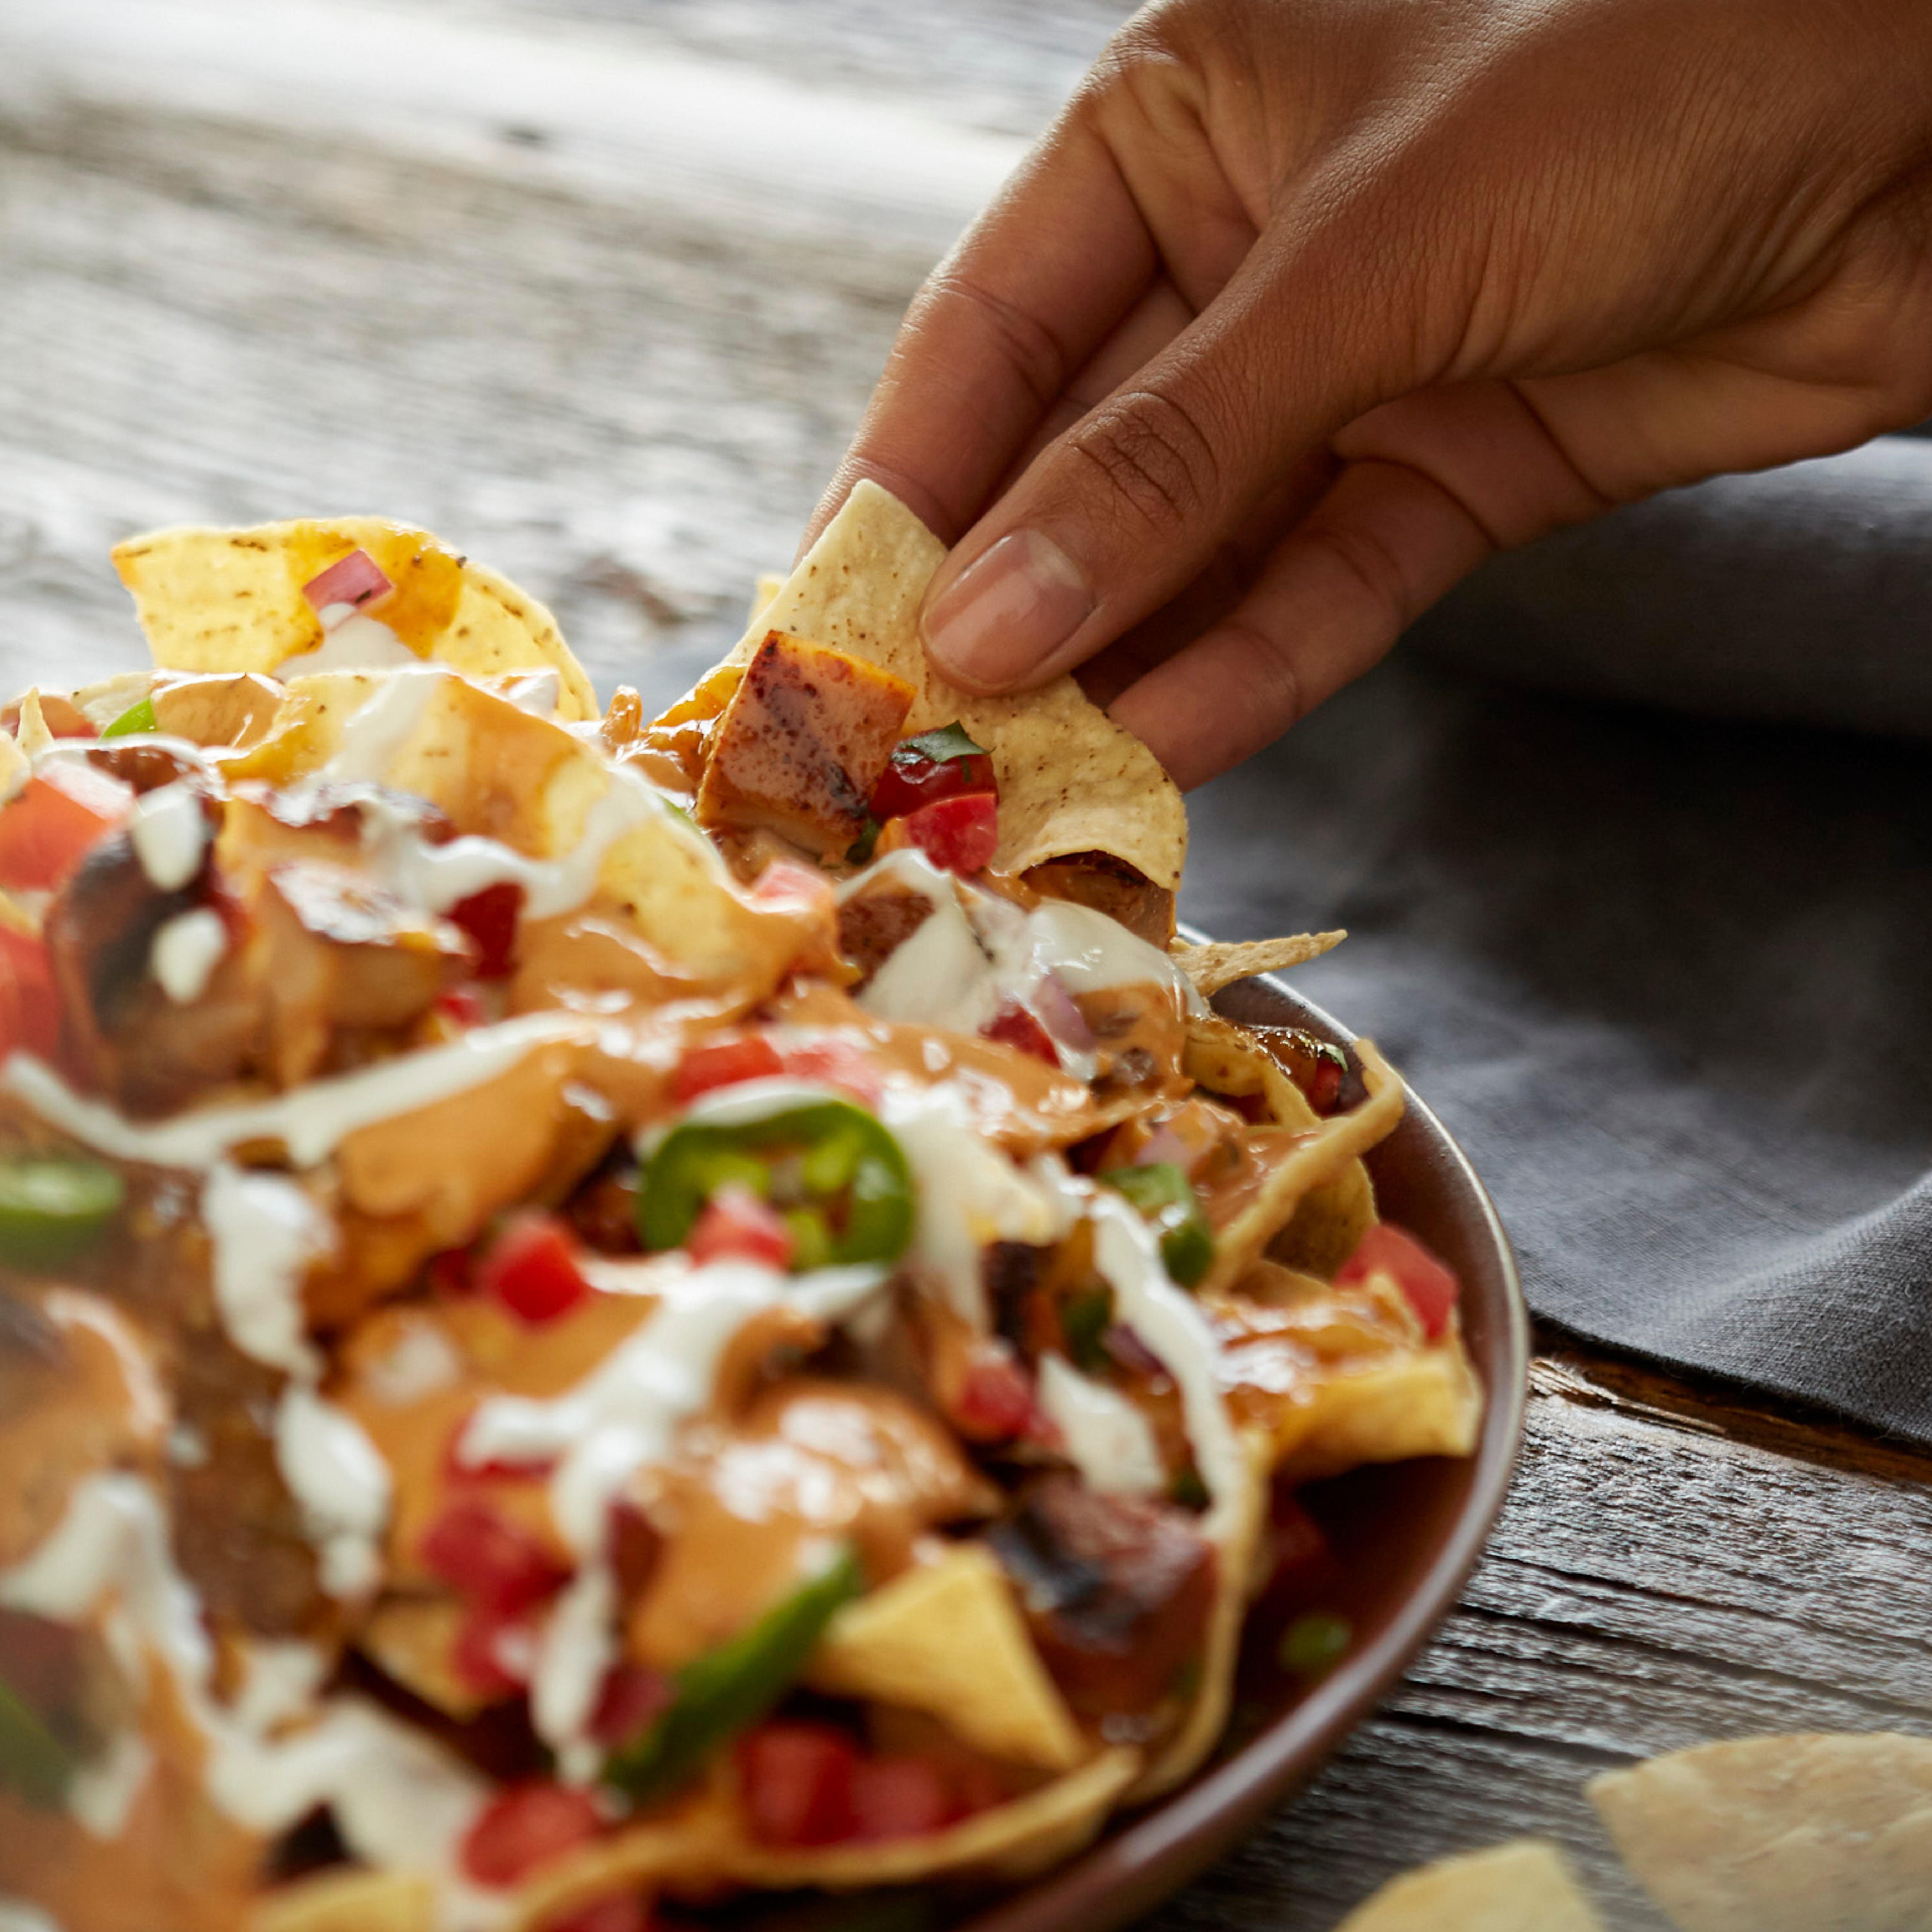 Nachos can be loaded with grilled adobo chicken, house-made pico de gallo and QDOBA's signature 3-cheese queso, free on any entreÌe!